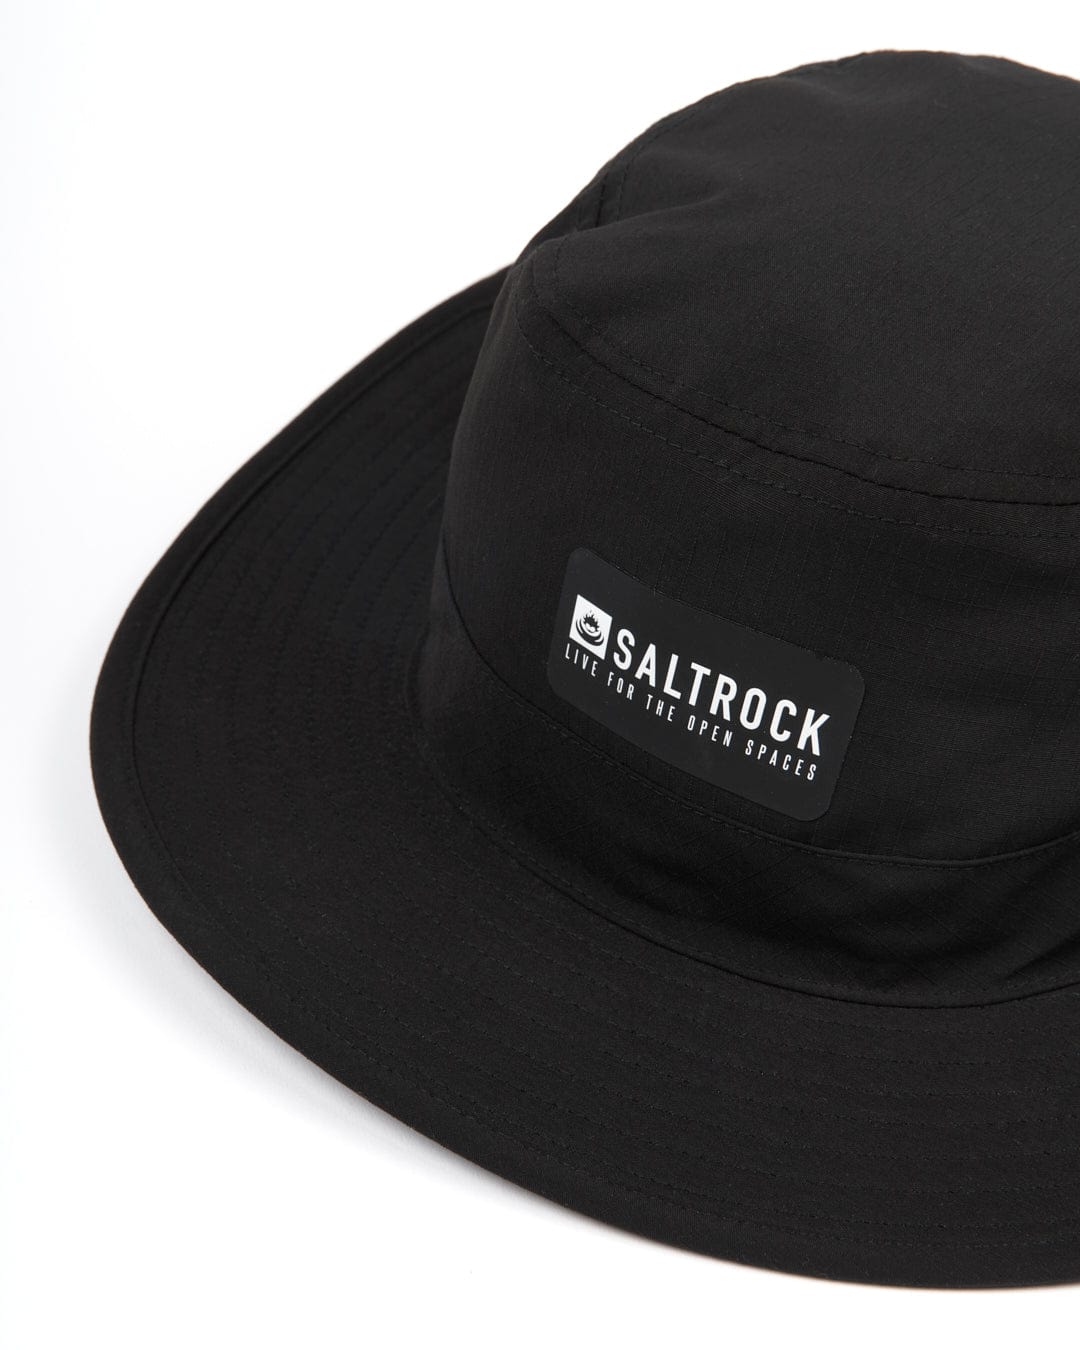 A black gaitor hat with Saltrock branding.